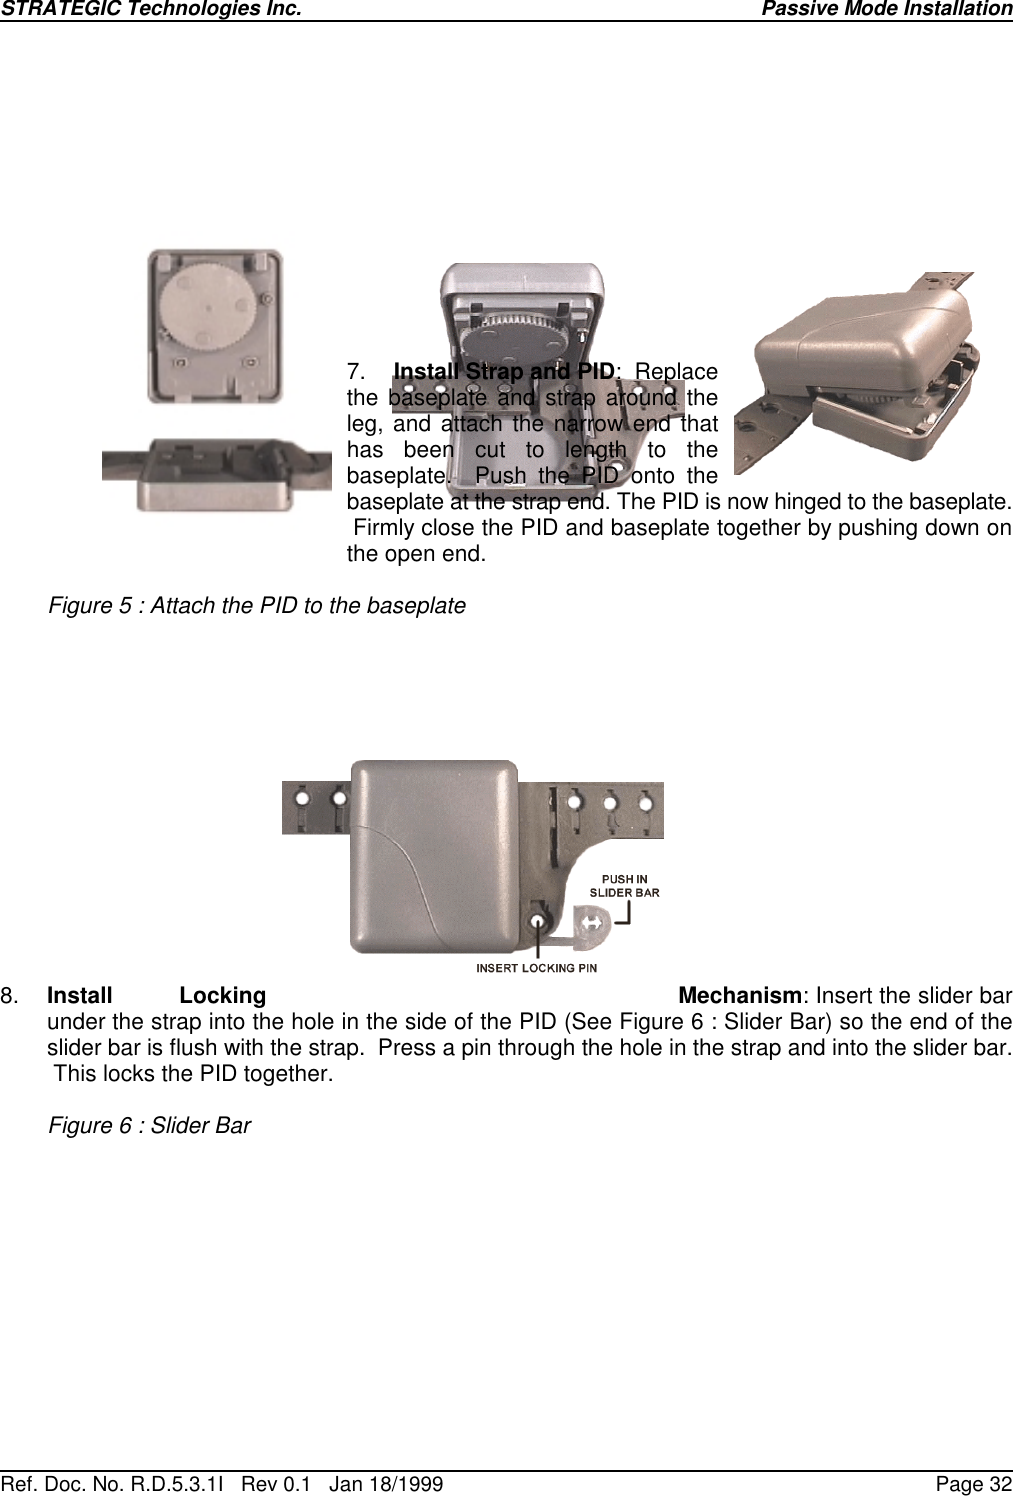 STRATEGIC Technologies Inc.Ref. Doc. No. R.D.5.3.1I   Rev 0.1   Jan 18/1999Passive Mode InstallationPage 327. Install Strap and PID:  Replacethe baseplate and strap around theleg, and attach the narrow end thathas been cut to length to thebaseplate.  Push the PID onto thebaseplate at the strap end. The PID is now hinged to the baseplate. Firmly close the PID and baseplate together by pushing down onthe open end.Figure 5 : Attach the PID to the baseplate8. Install Locking Mechanism: Insert the slider barunder the strap into the hole in the side of the PID (See Figure 6 : Slider Bar) so the end of theslider bar is flush with the strap.  Press a pin through the hole in the strap and into the slider bar. This locks the PID together.Figure 6 : Slider Bar